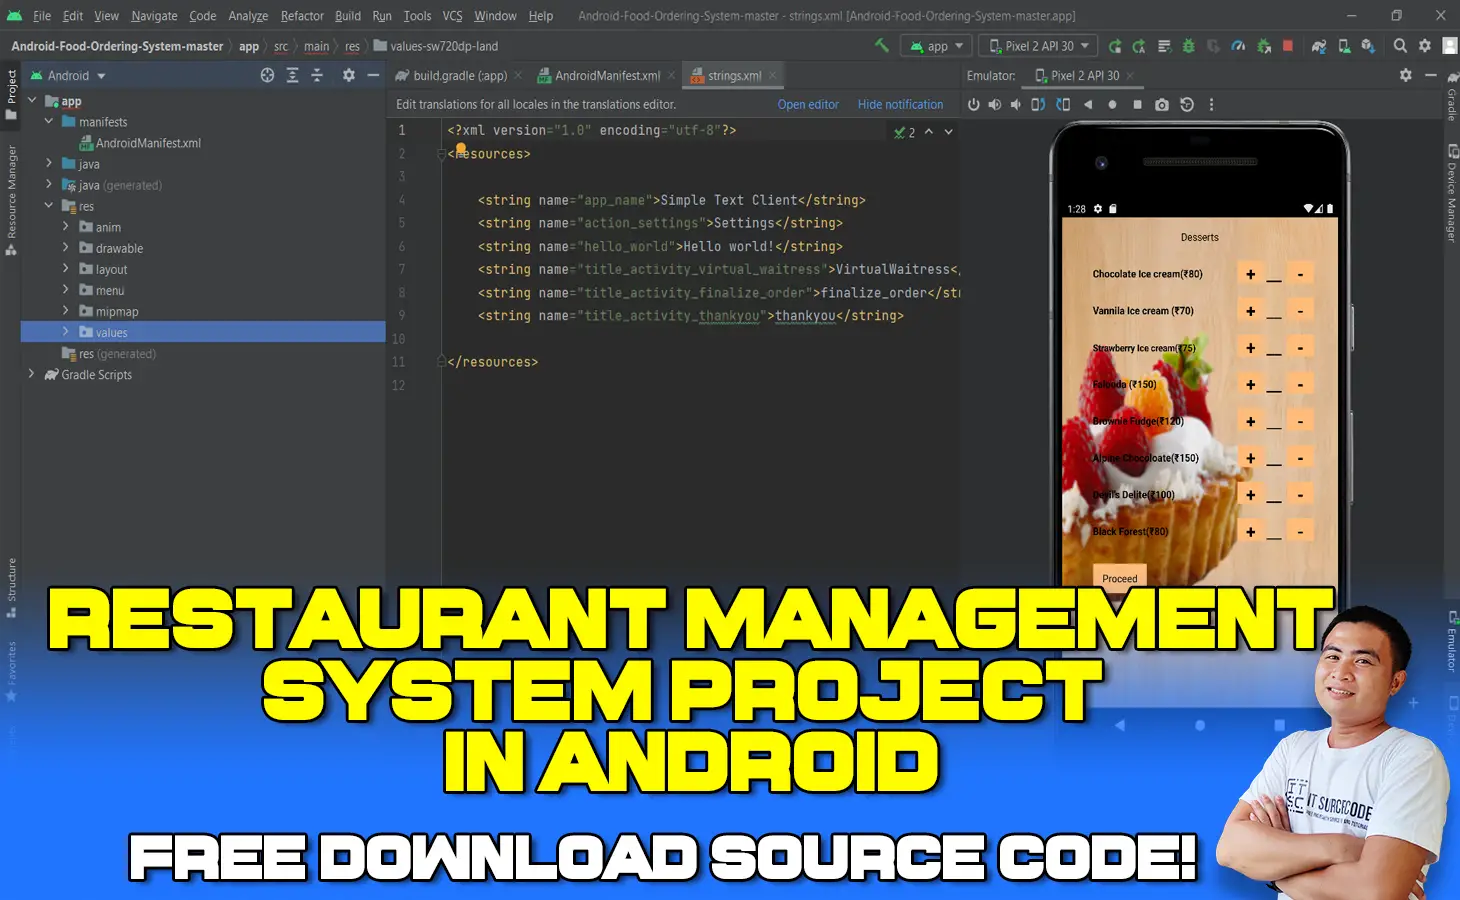 Restaurant Management System Project in Android with Source Code